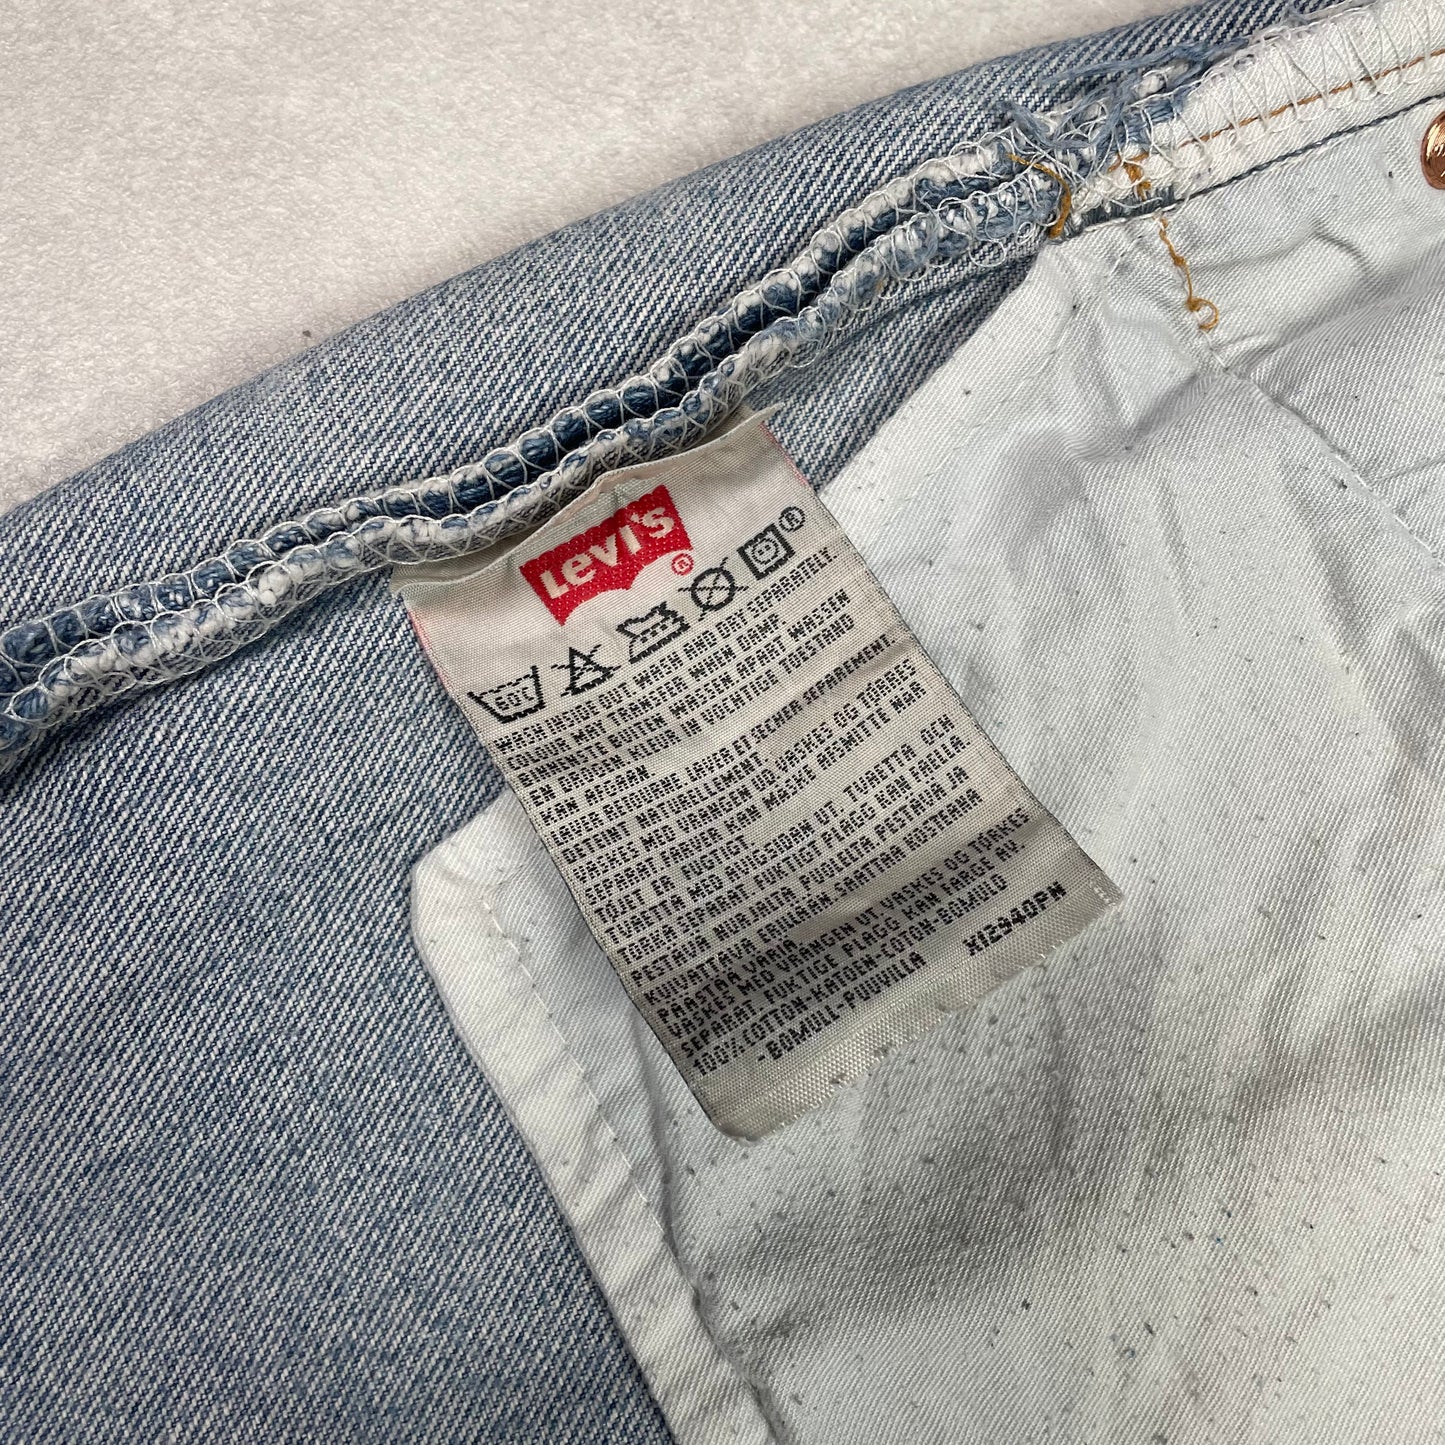 Vintage Levi’s 501 Jeans Paint Stained Made in UK